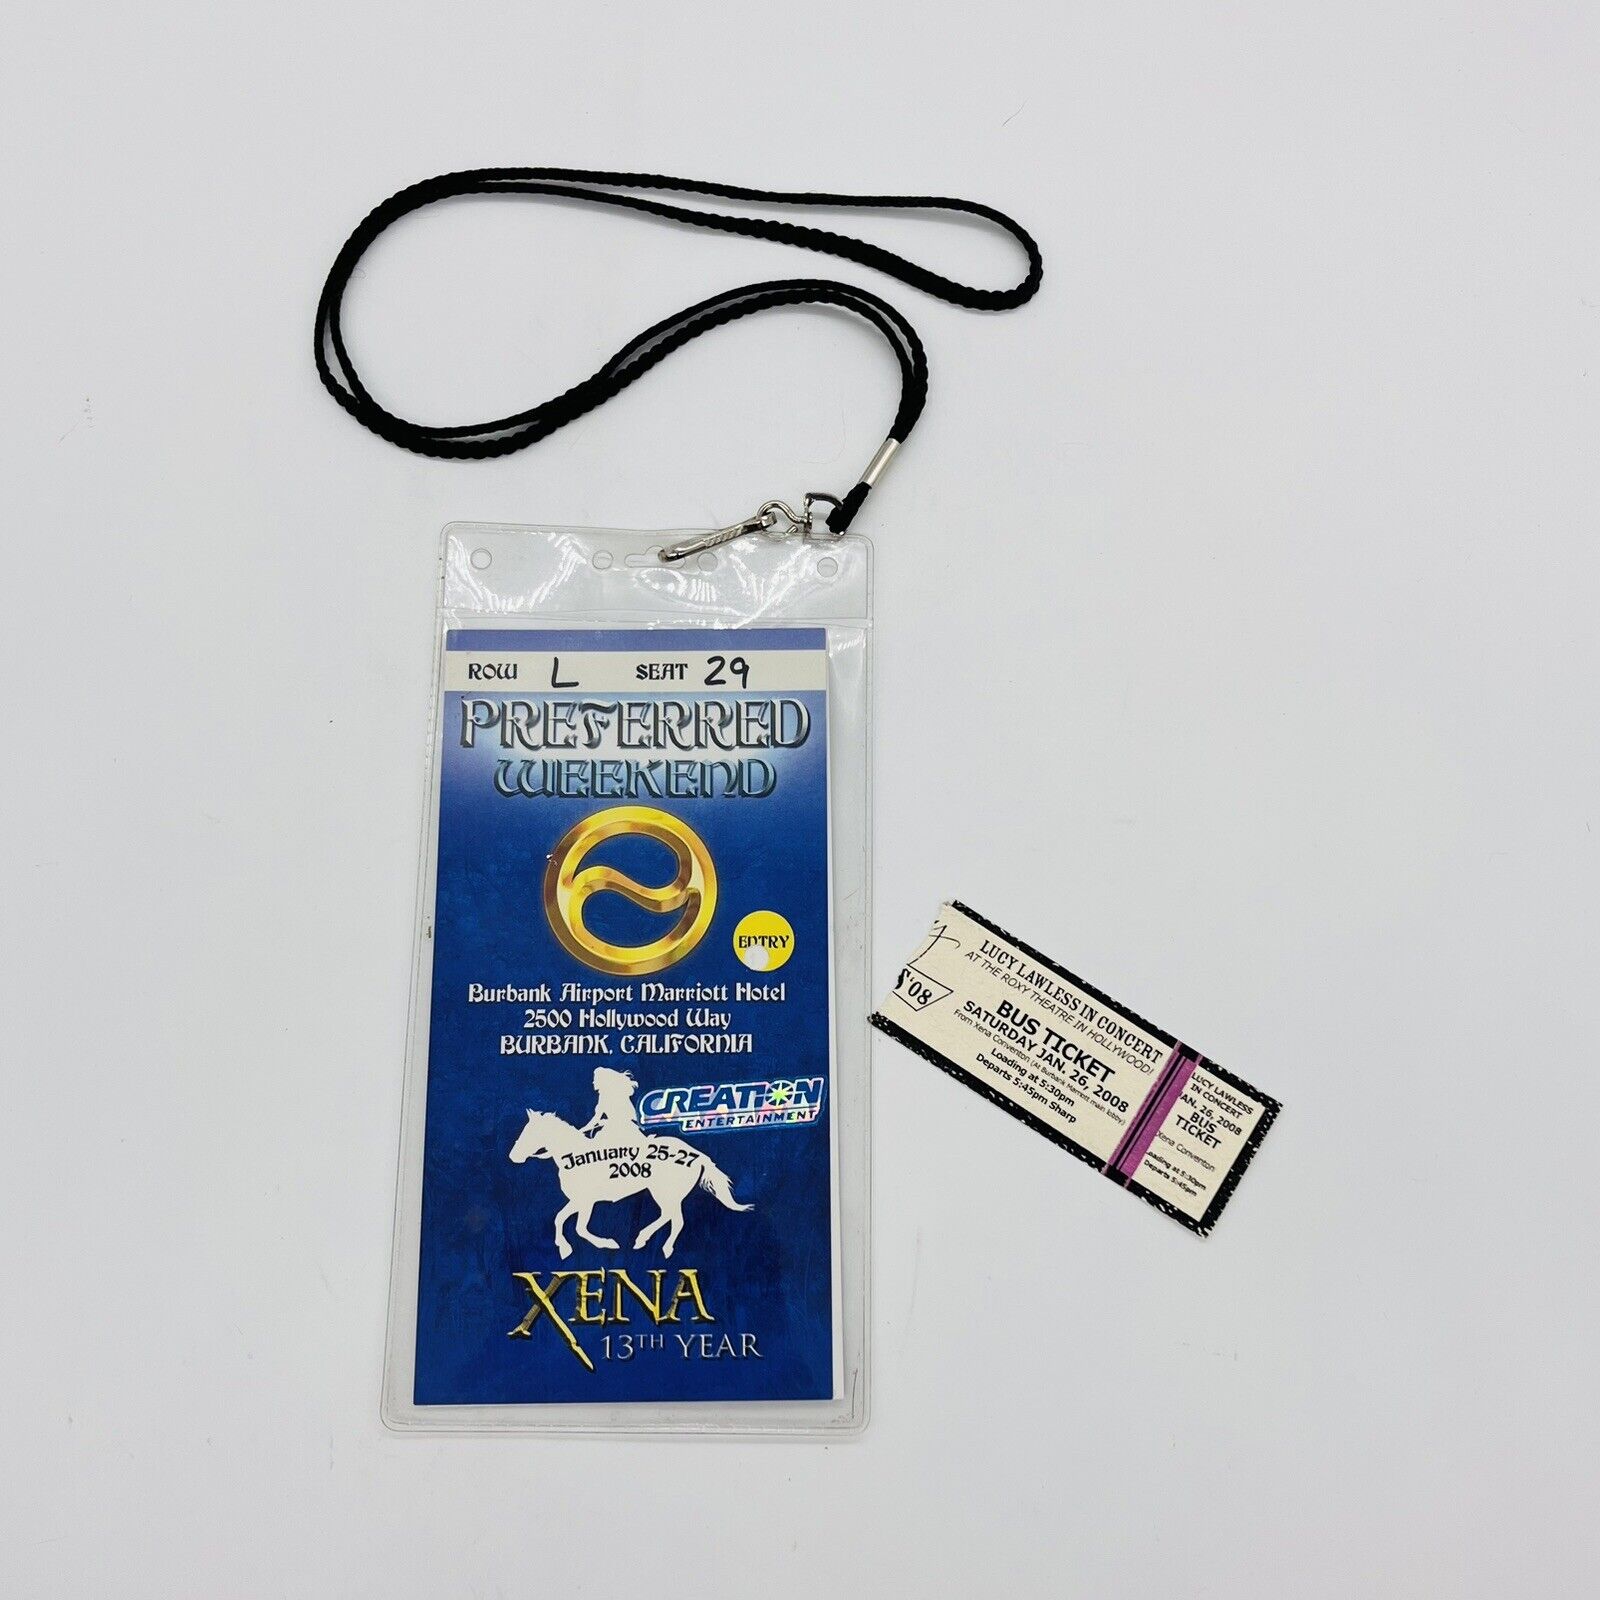 Xena Warrior Princess 13th Year Preferred Weekend Convention Access Pass Lanyard